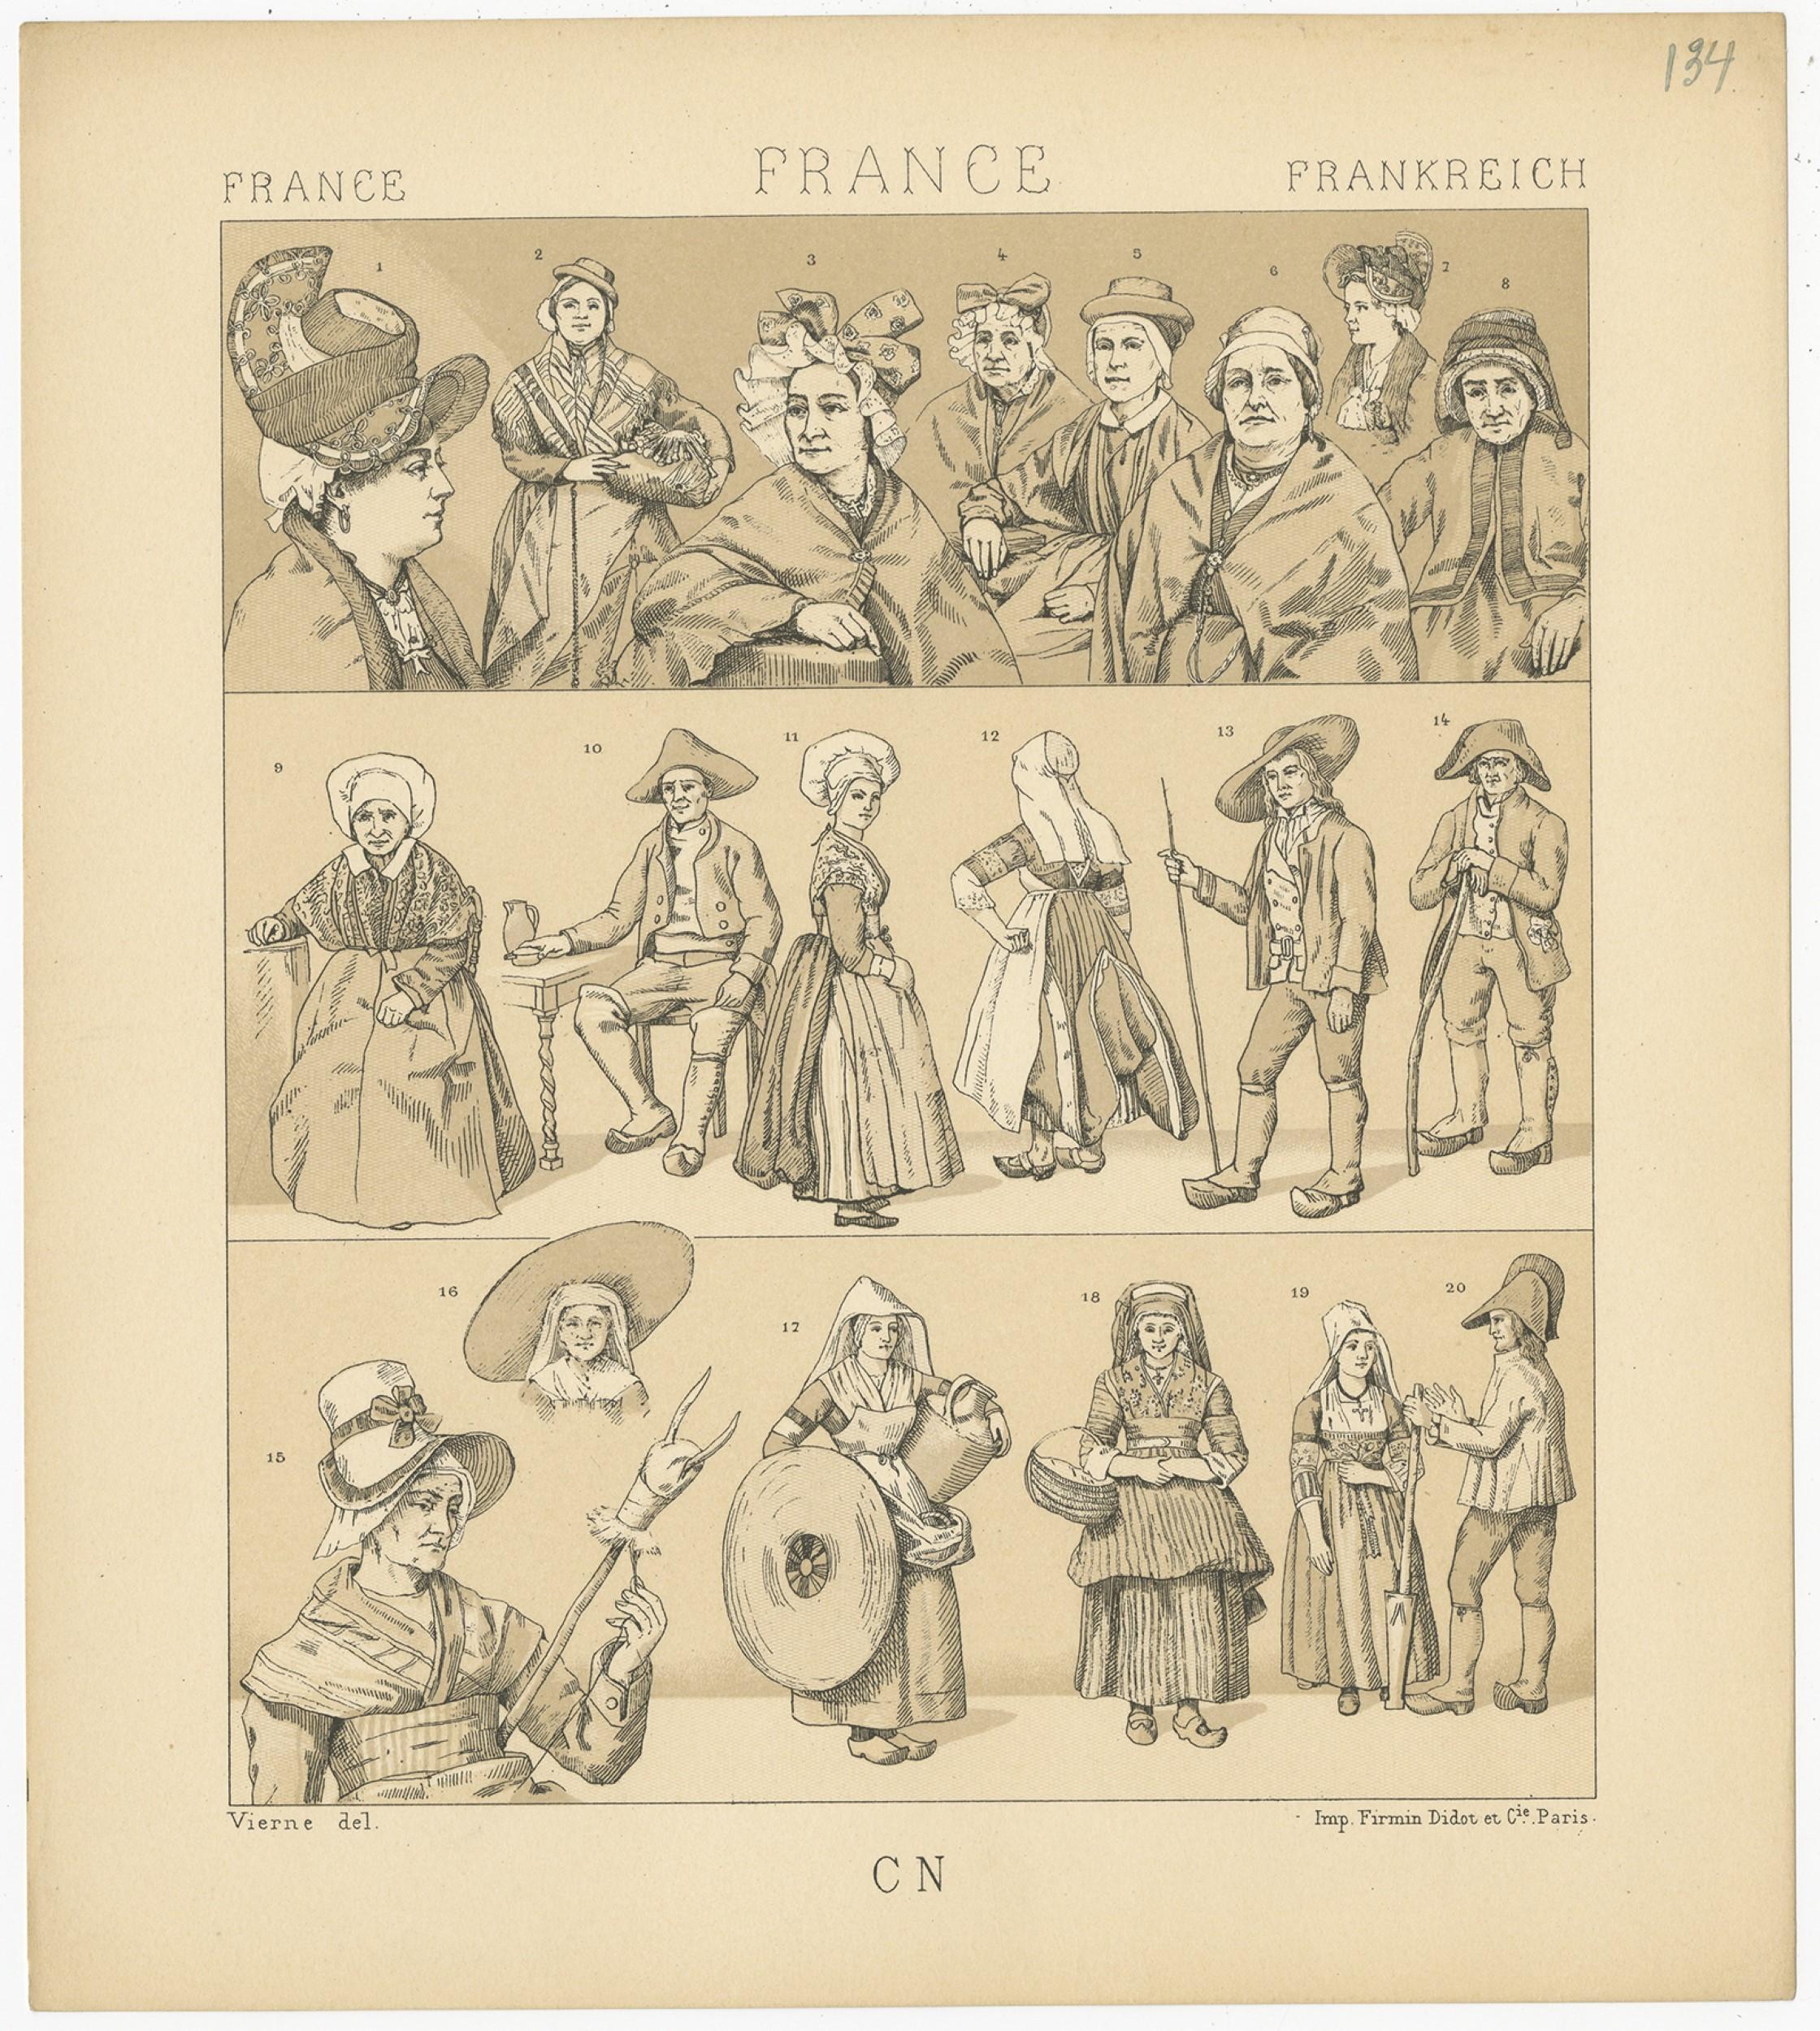 Antique print titled 'France - France - Frankreich'. Chromolithograph of French outfits. This print originates from 'Le Costume Historique' by M.A. Racinet. Published, circa 1880.

    